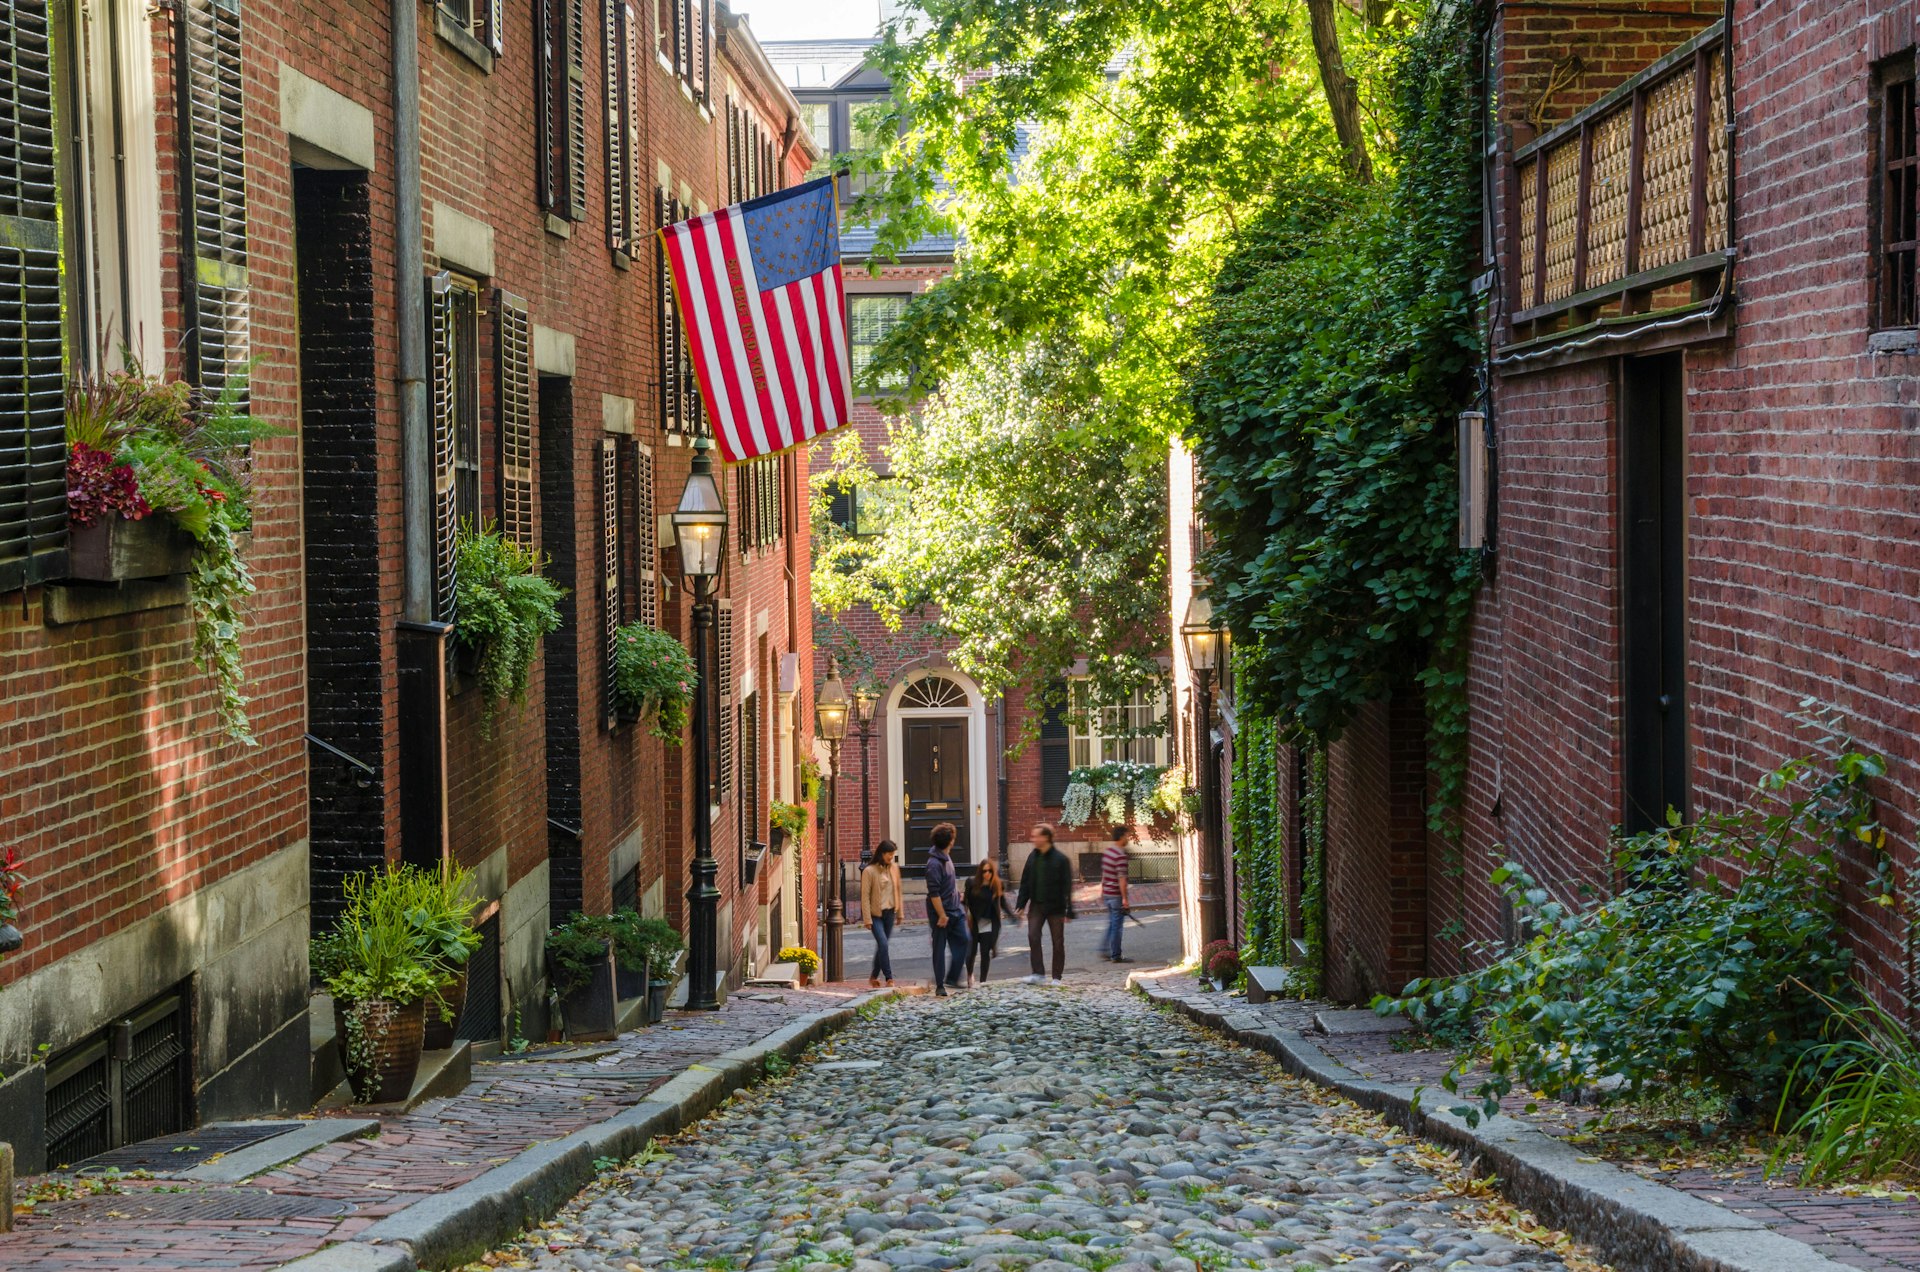 Tourists wandering along Acorn Street in Beacon Hill on a warm autumn day.